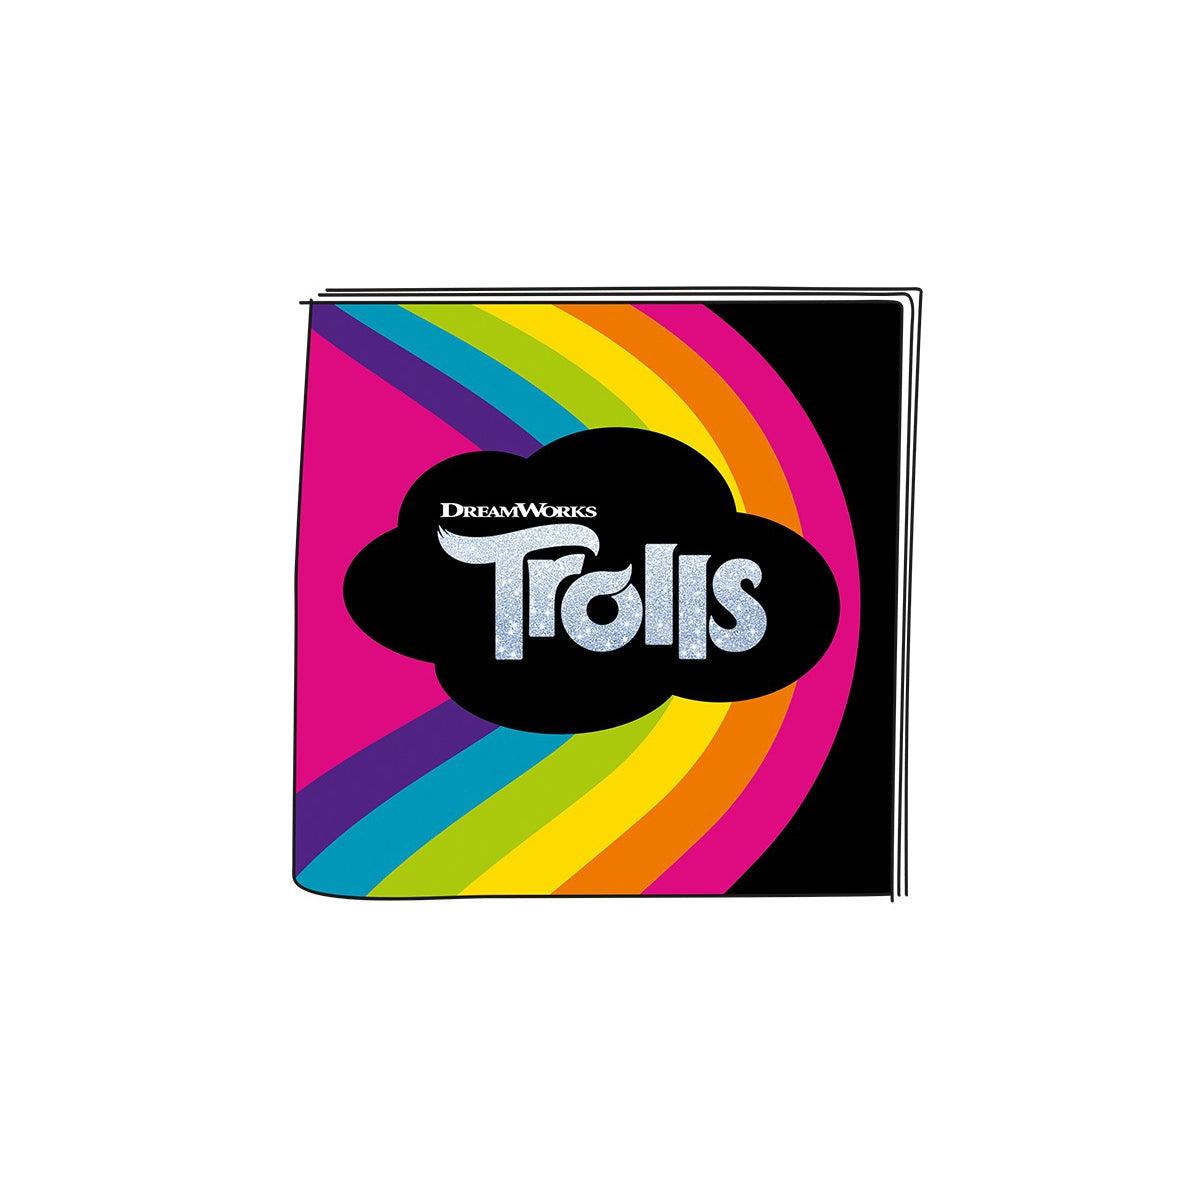 Tonies Trolls Original Motion Picture Soundtrack - Audio Character for use with Toniebox Player